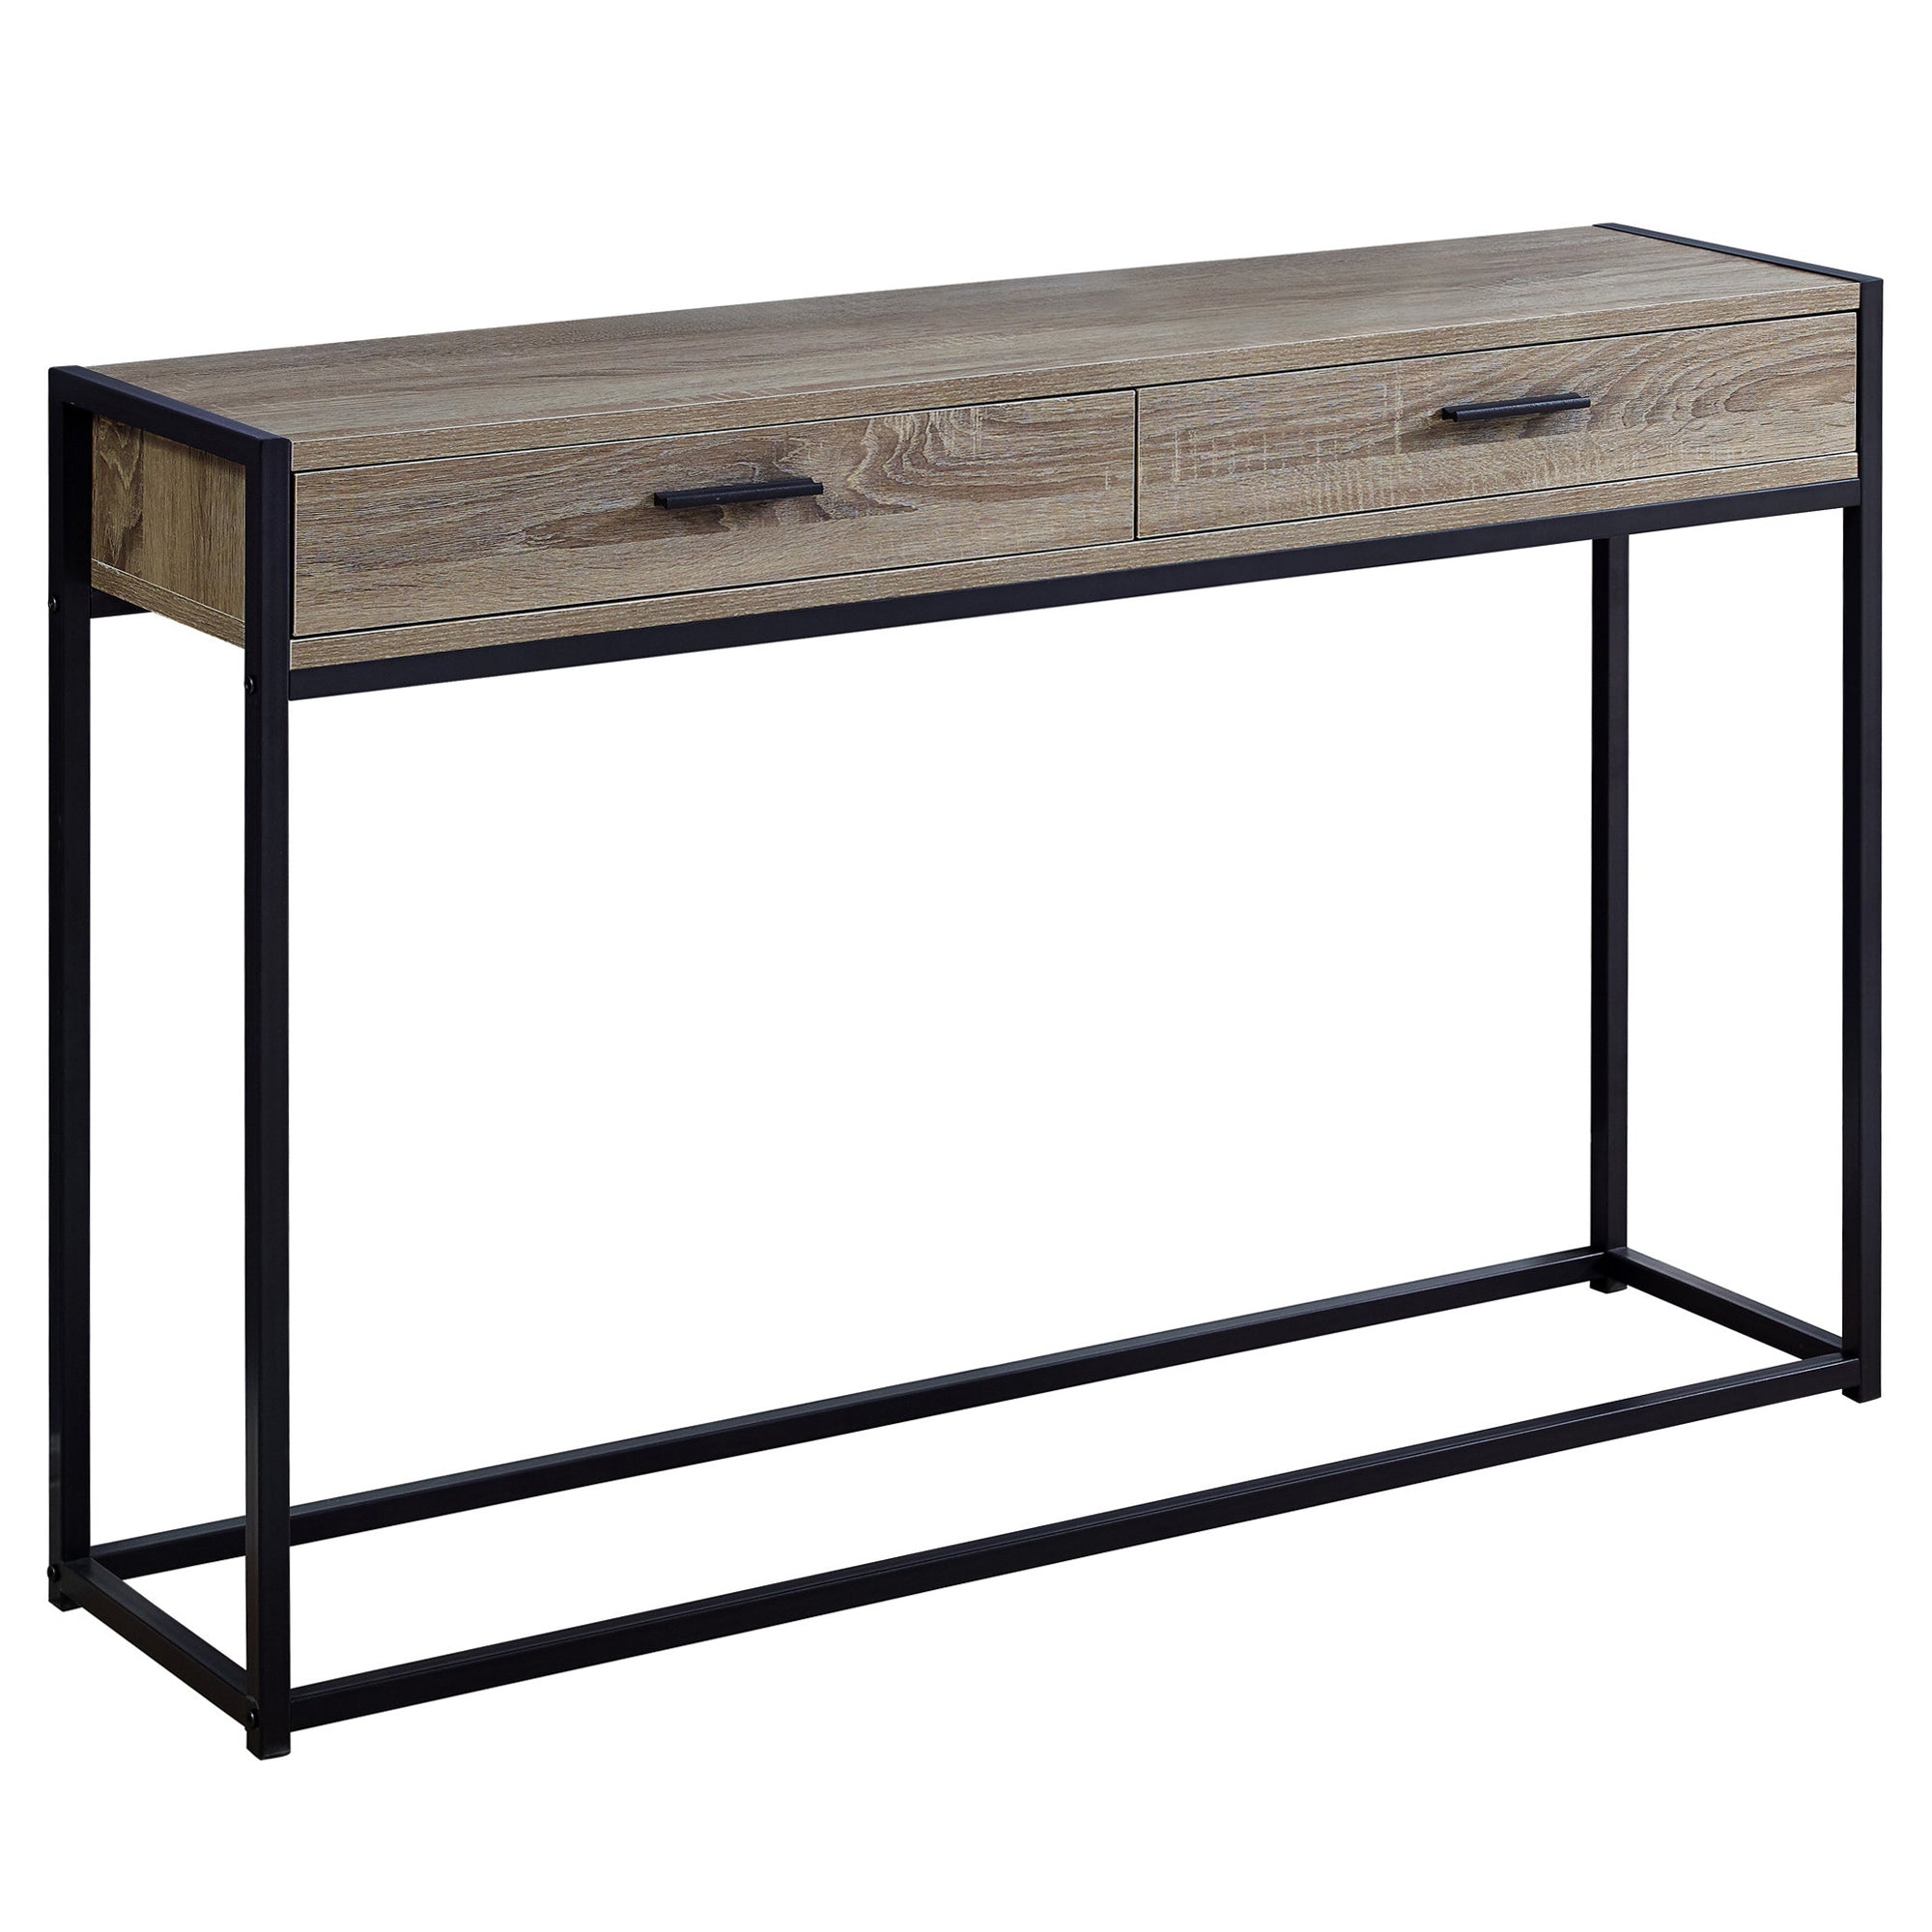 12" x 48" x 32" Dark Taupe Laminated Finish and Black Metal Accent Table